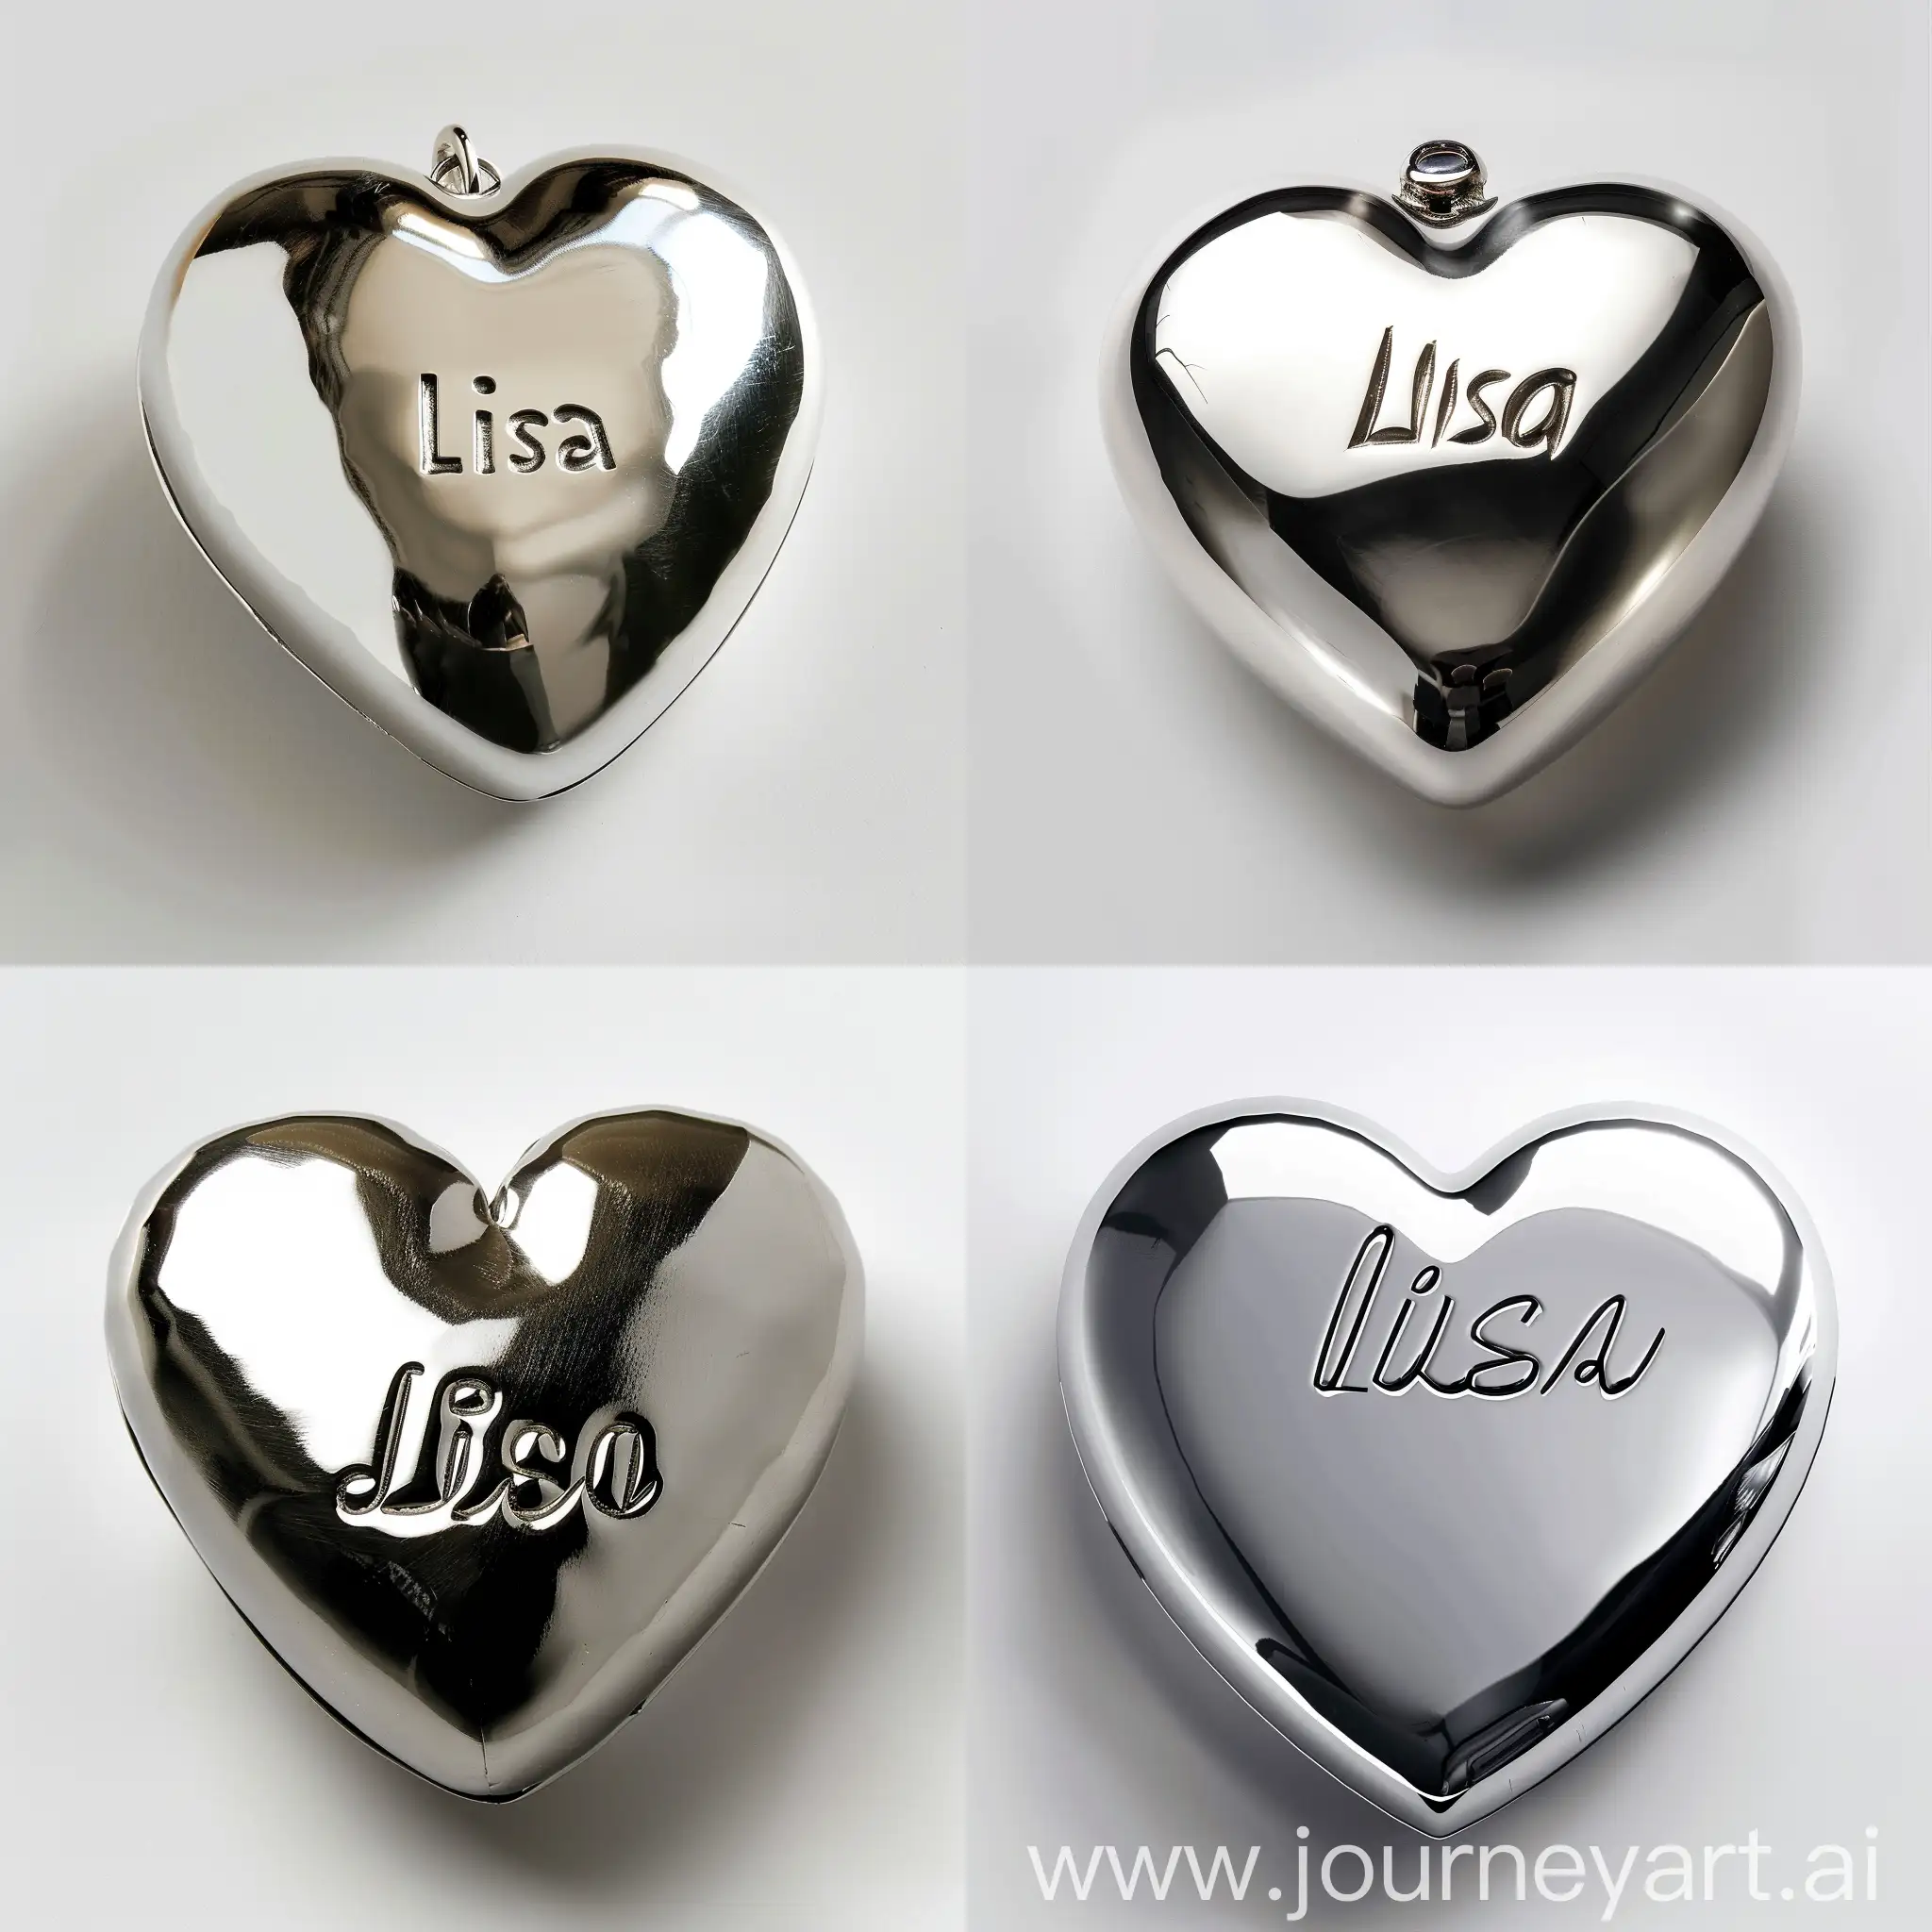 Silver-Heart-Pendant-with-Personalized-Inscription-Lisa-on-White-Background